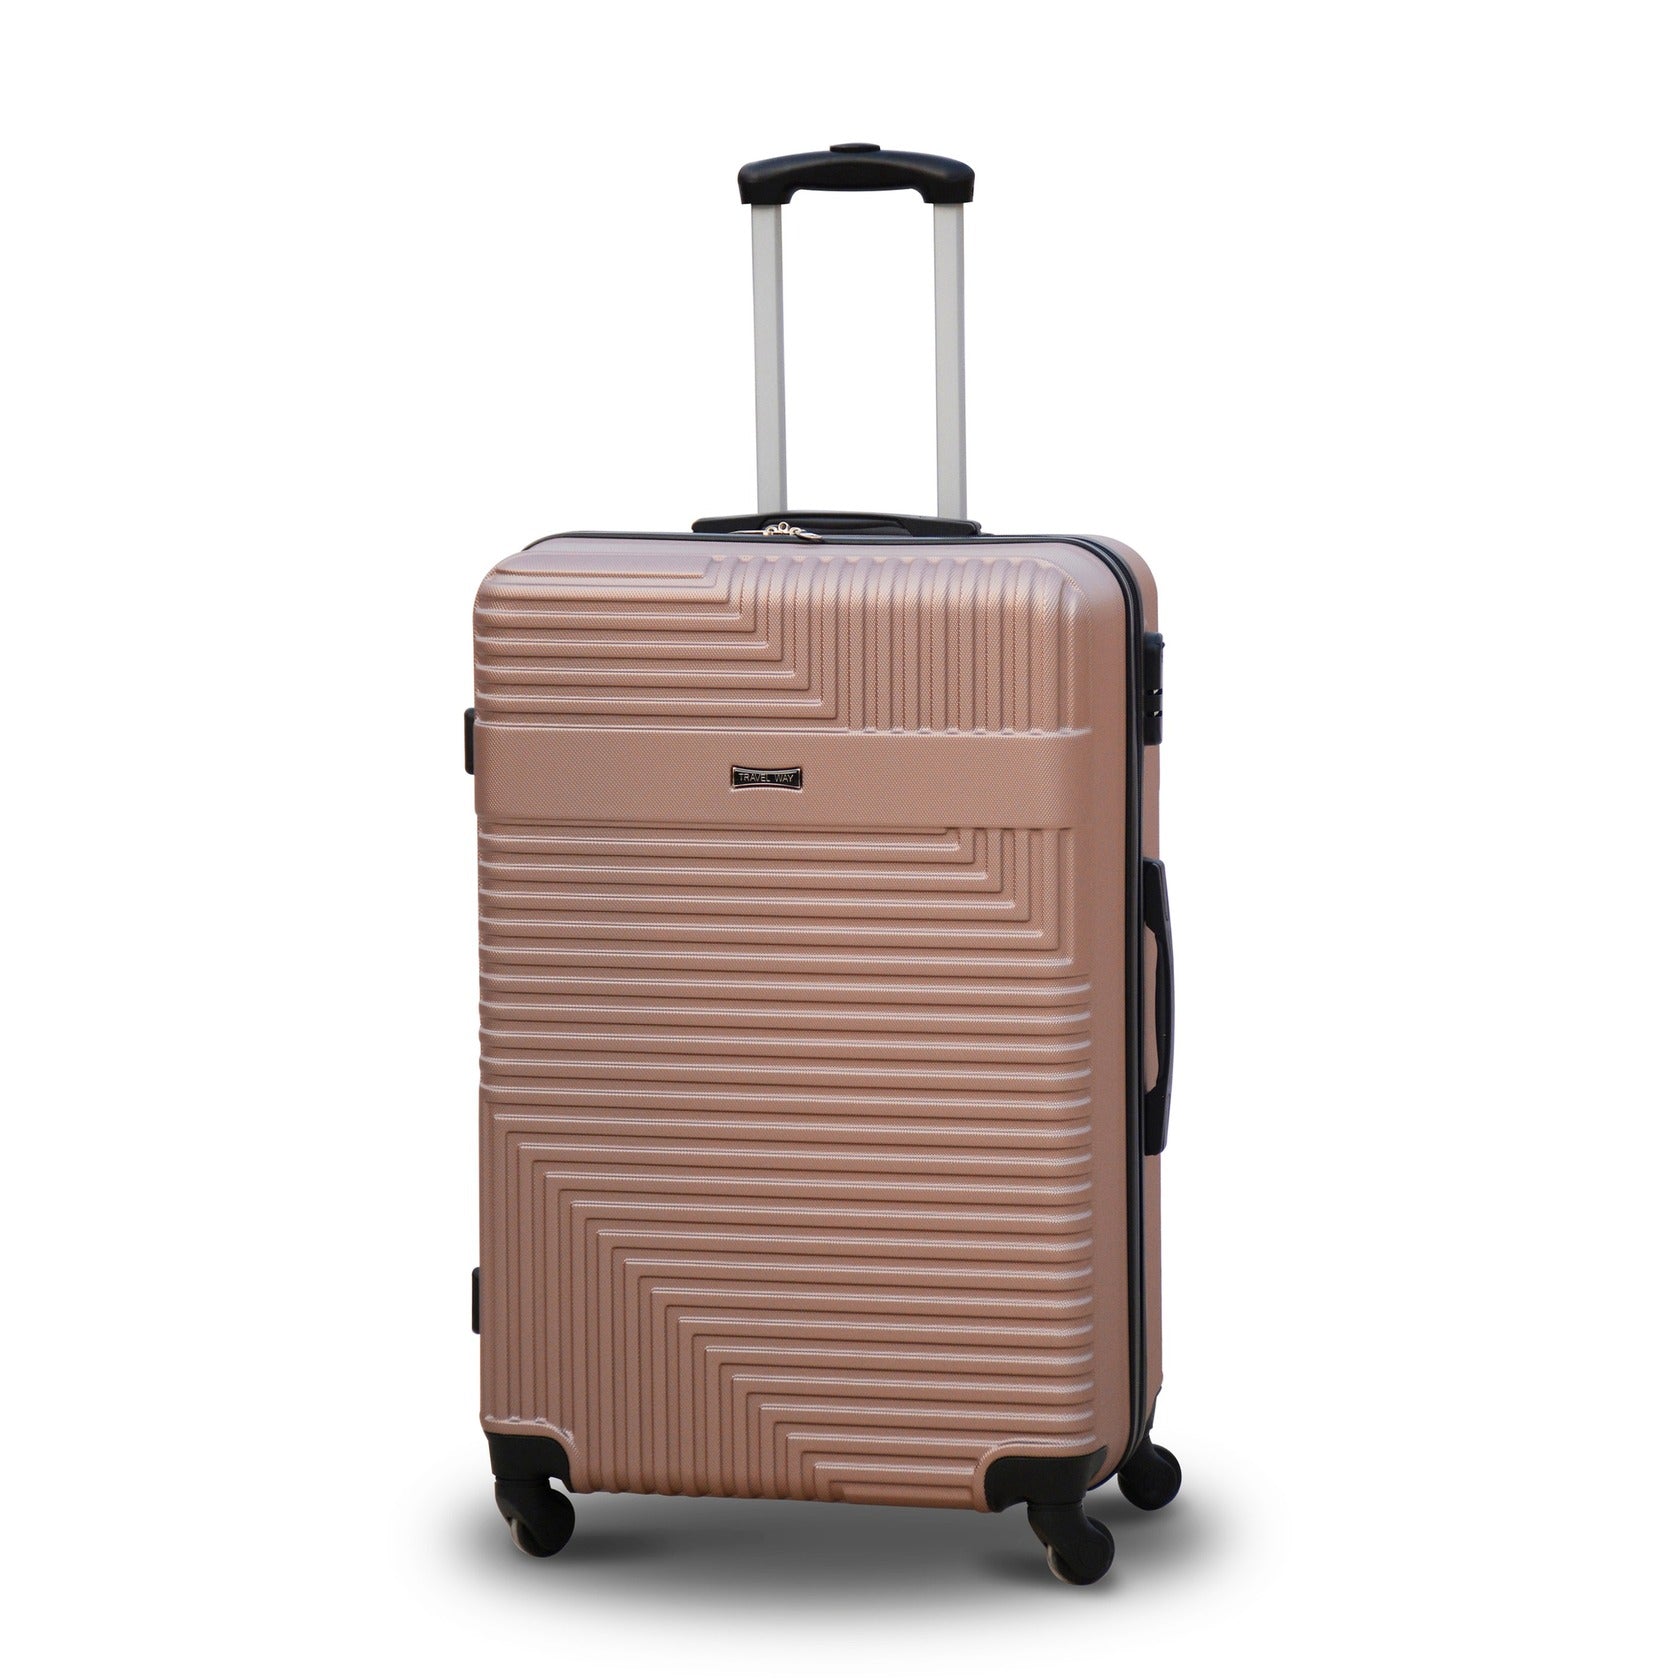 28" Rose Gold Travel Way ABS Lightweight Luggage Bag With Spinner Wheel